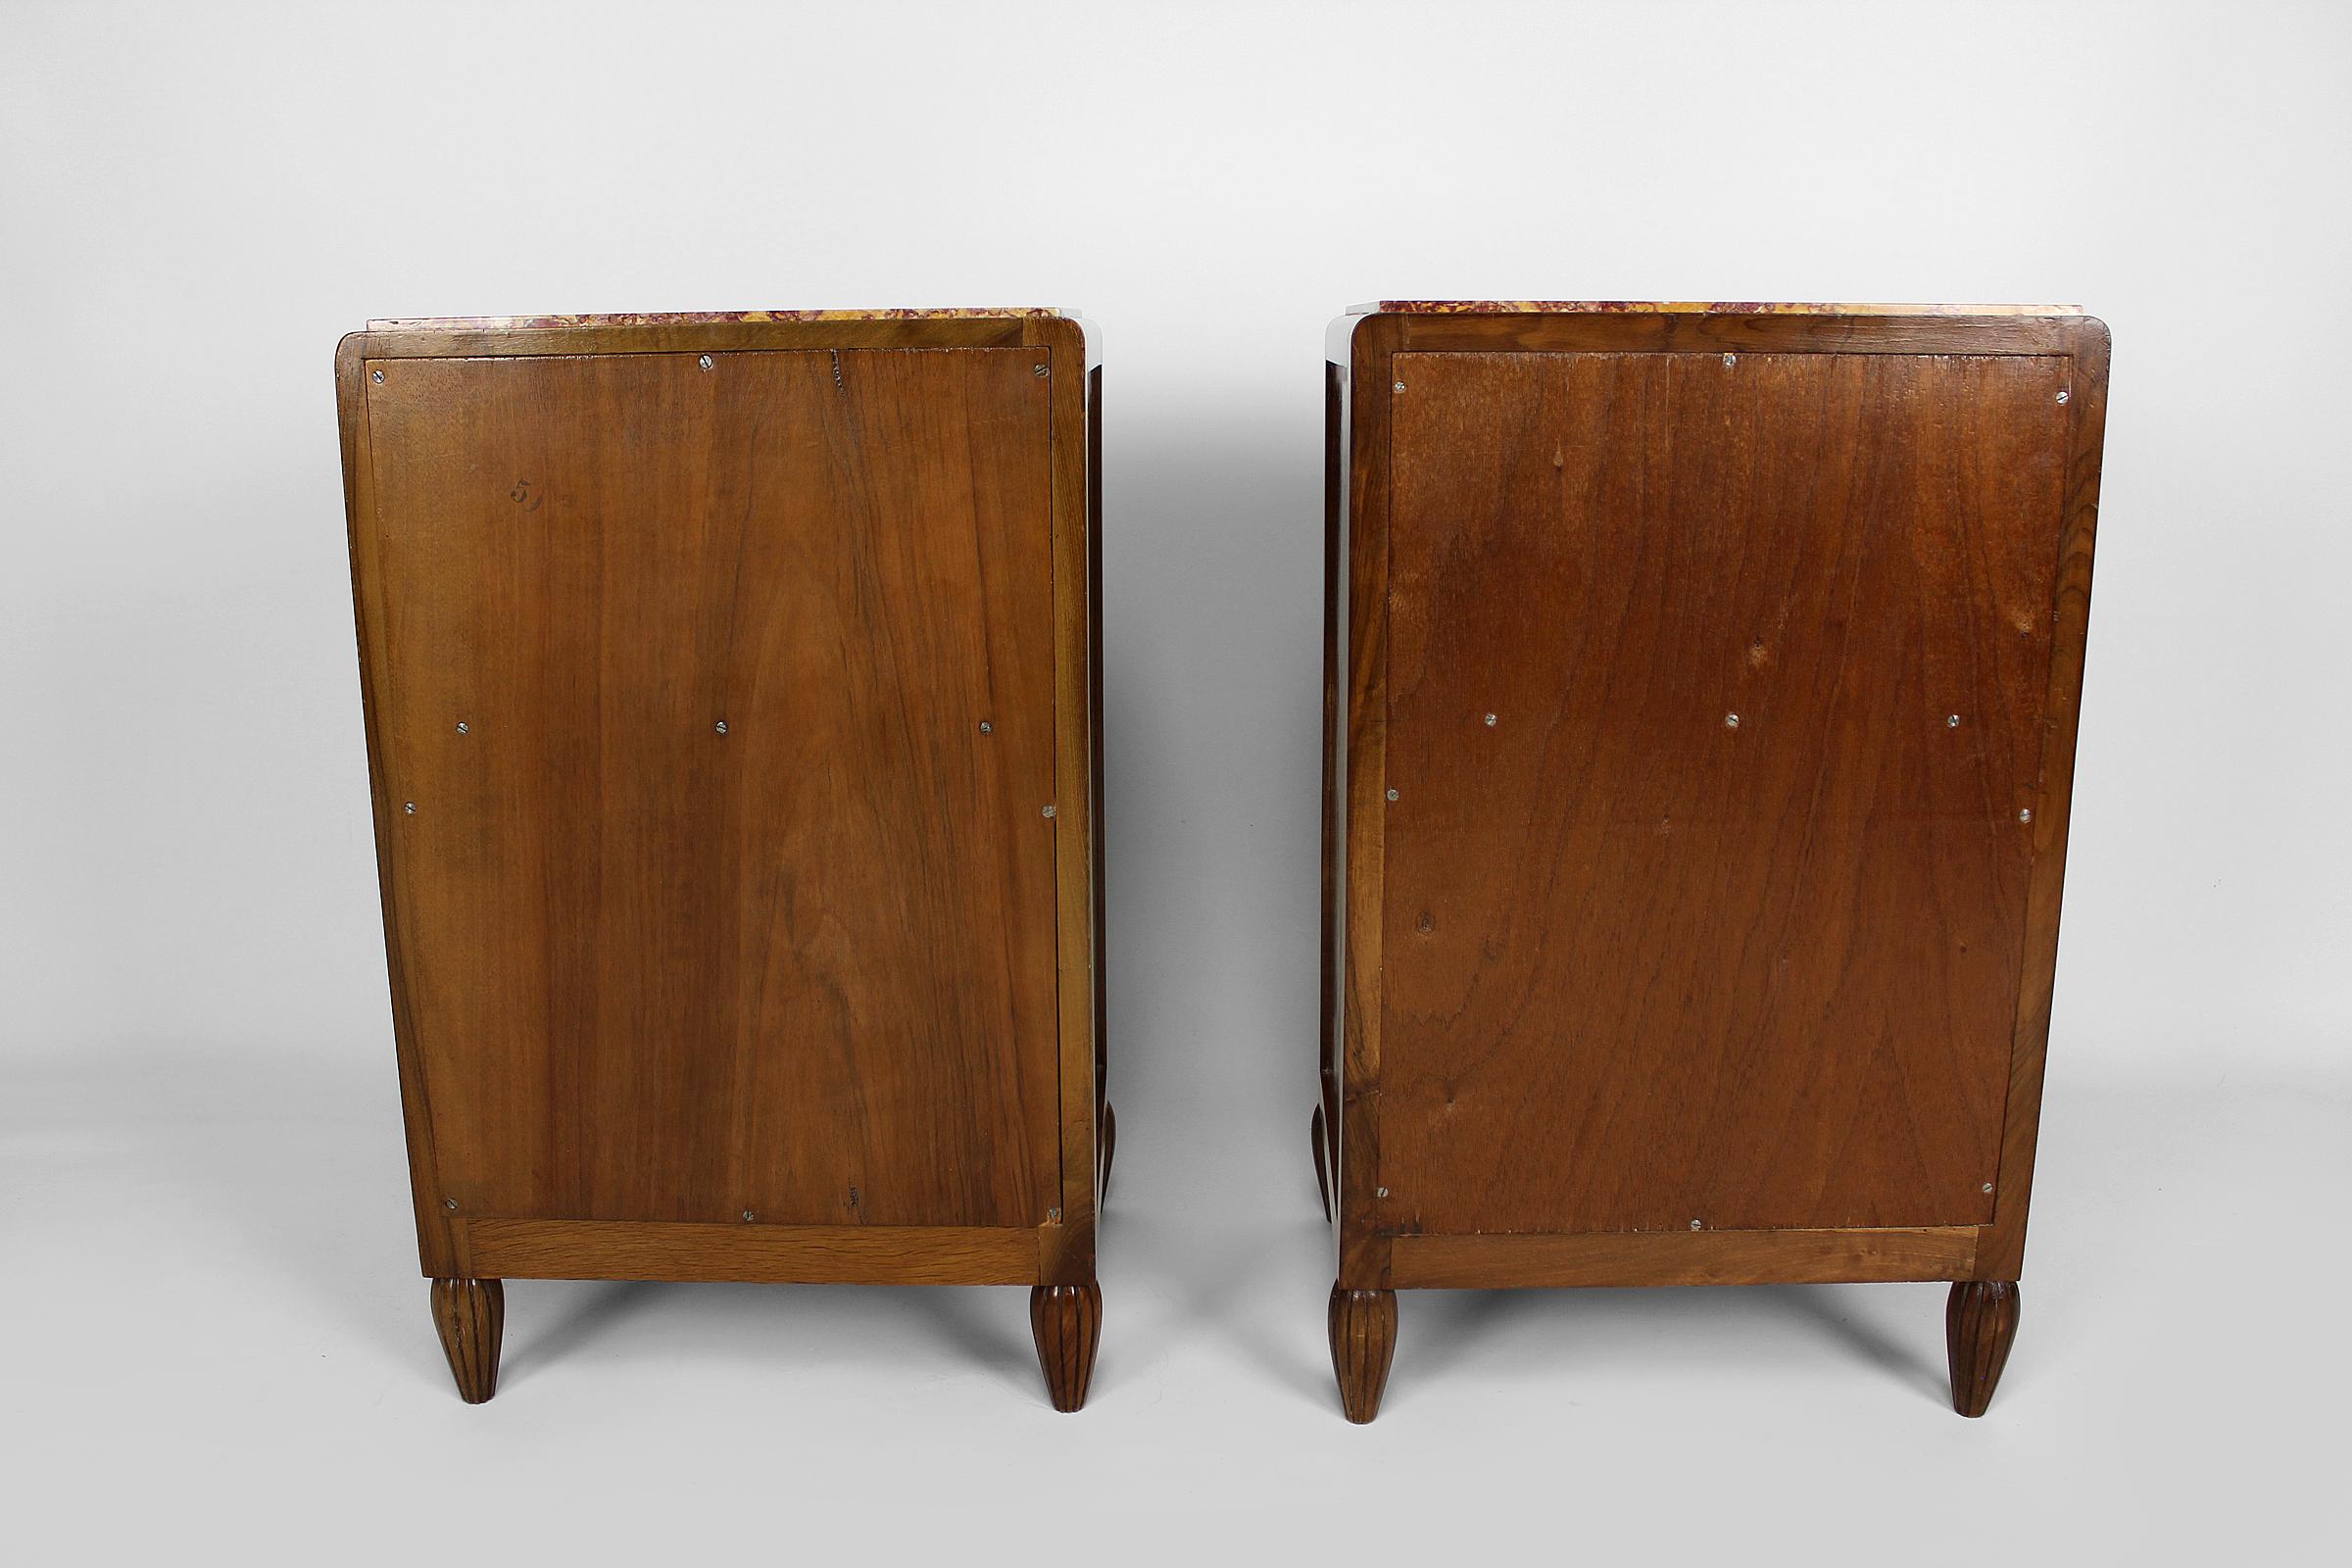 Early 20th Century Pair of Art Deco Bedside Tables by Ateliers Gauthier-Poinsignon, circa 1920-1930 For Sale